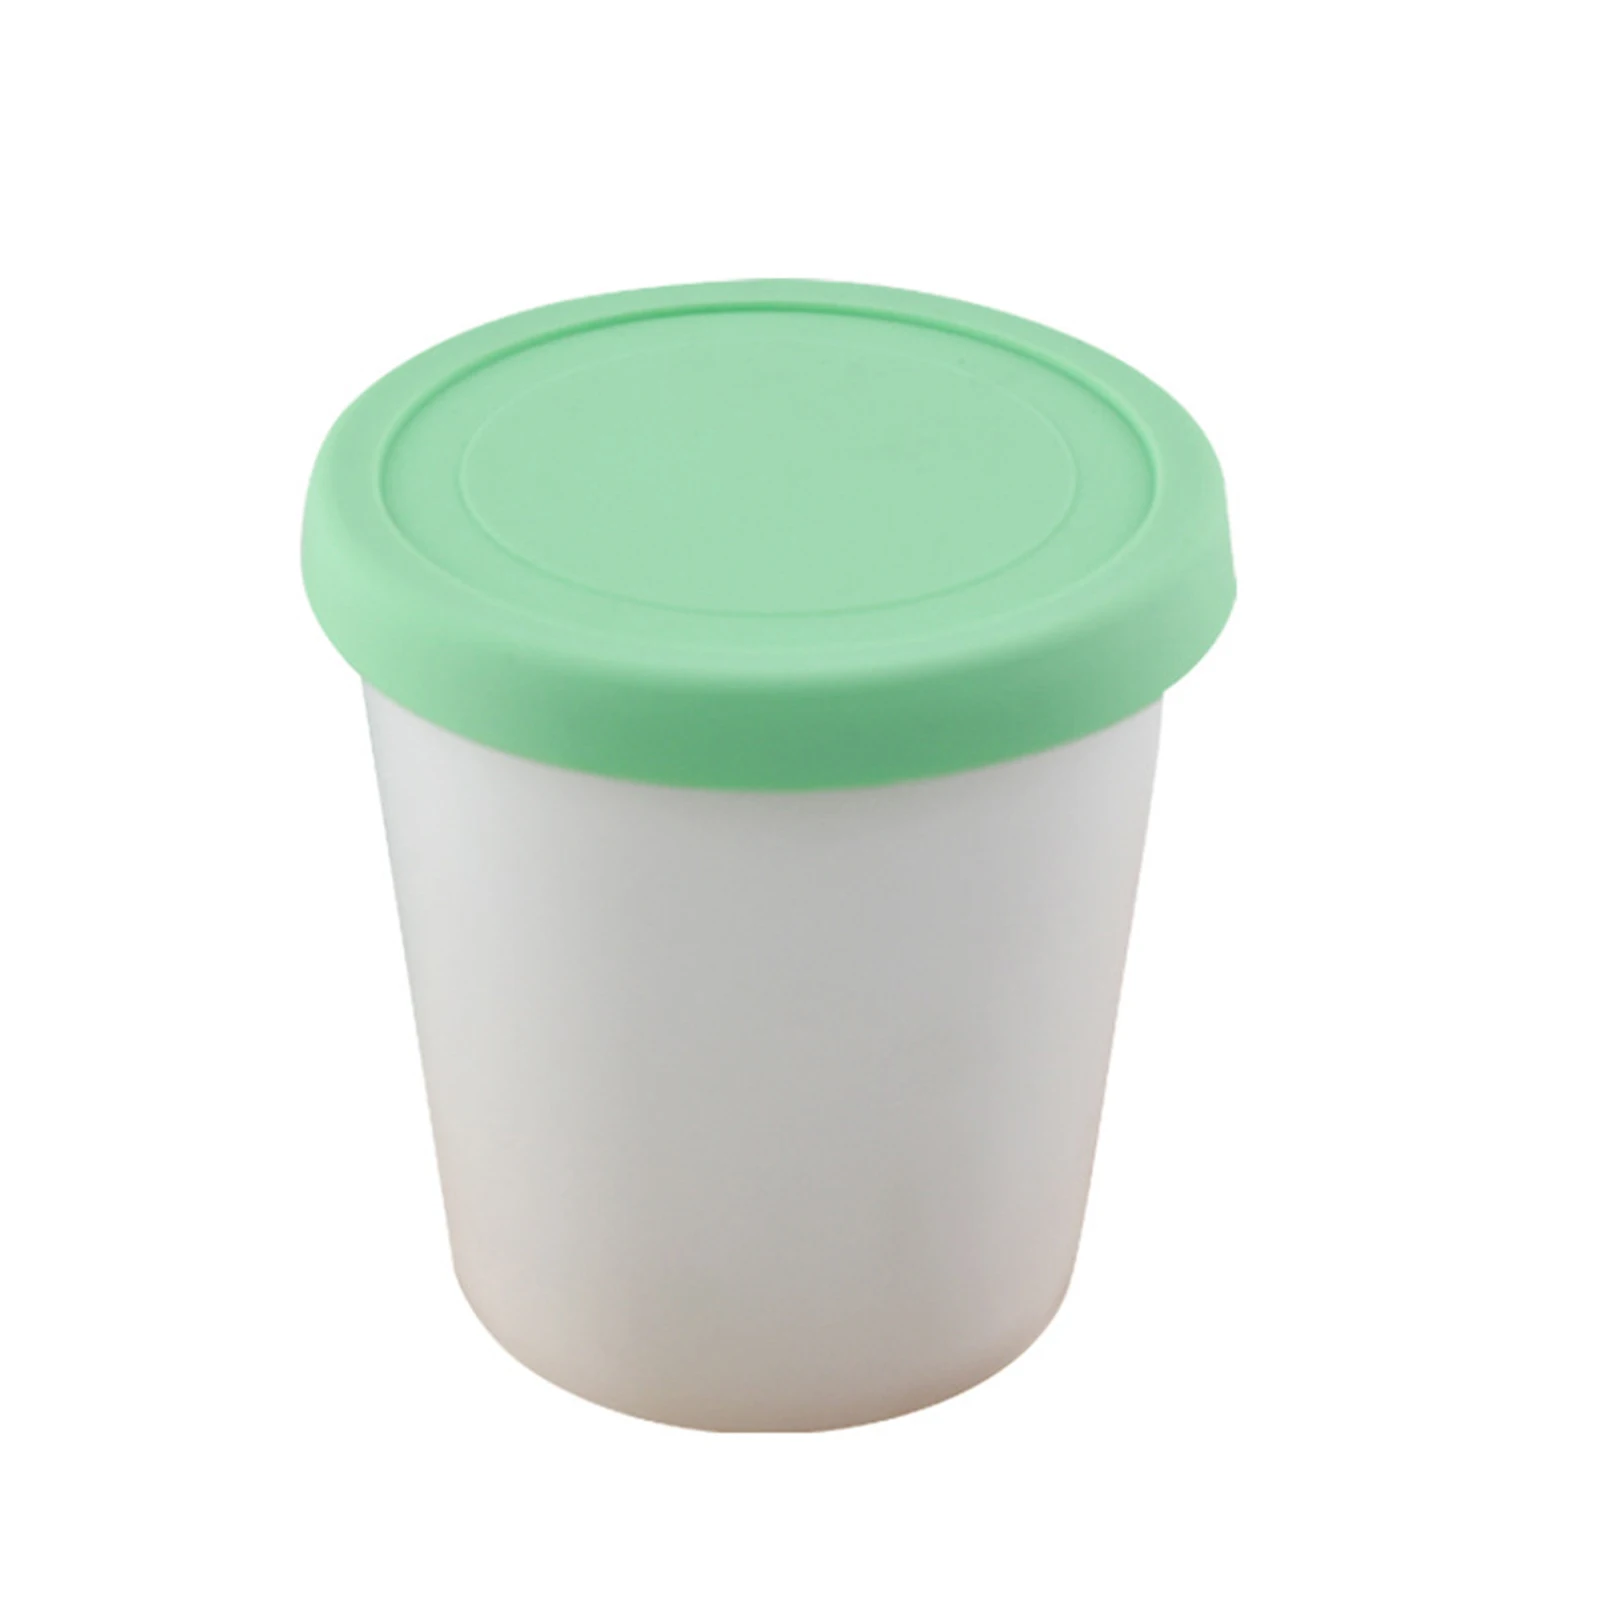 https://ae01.alicdn.com/kf/S93c63a8d0ace4ca395c0f13e3087d787u/Sealing-Cylindrical-Ice-Cream-Container-Reusable-snd-Odorless-Ice-Cream-Container-for-Making-Milkshake-and-Smoothie.jpg